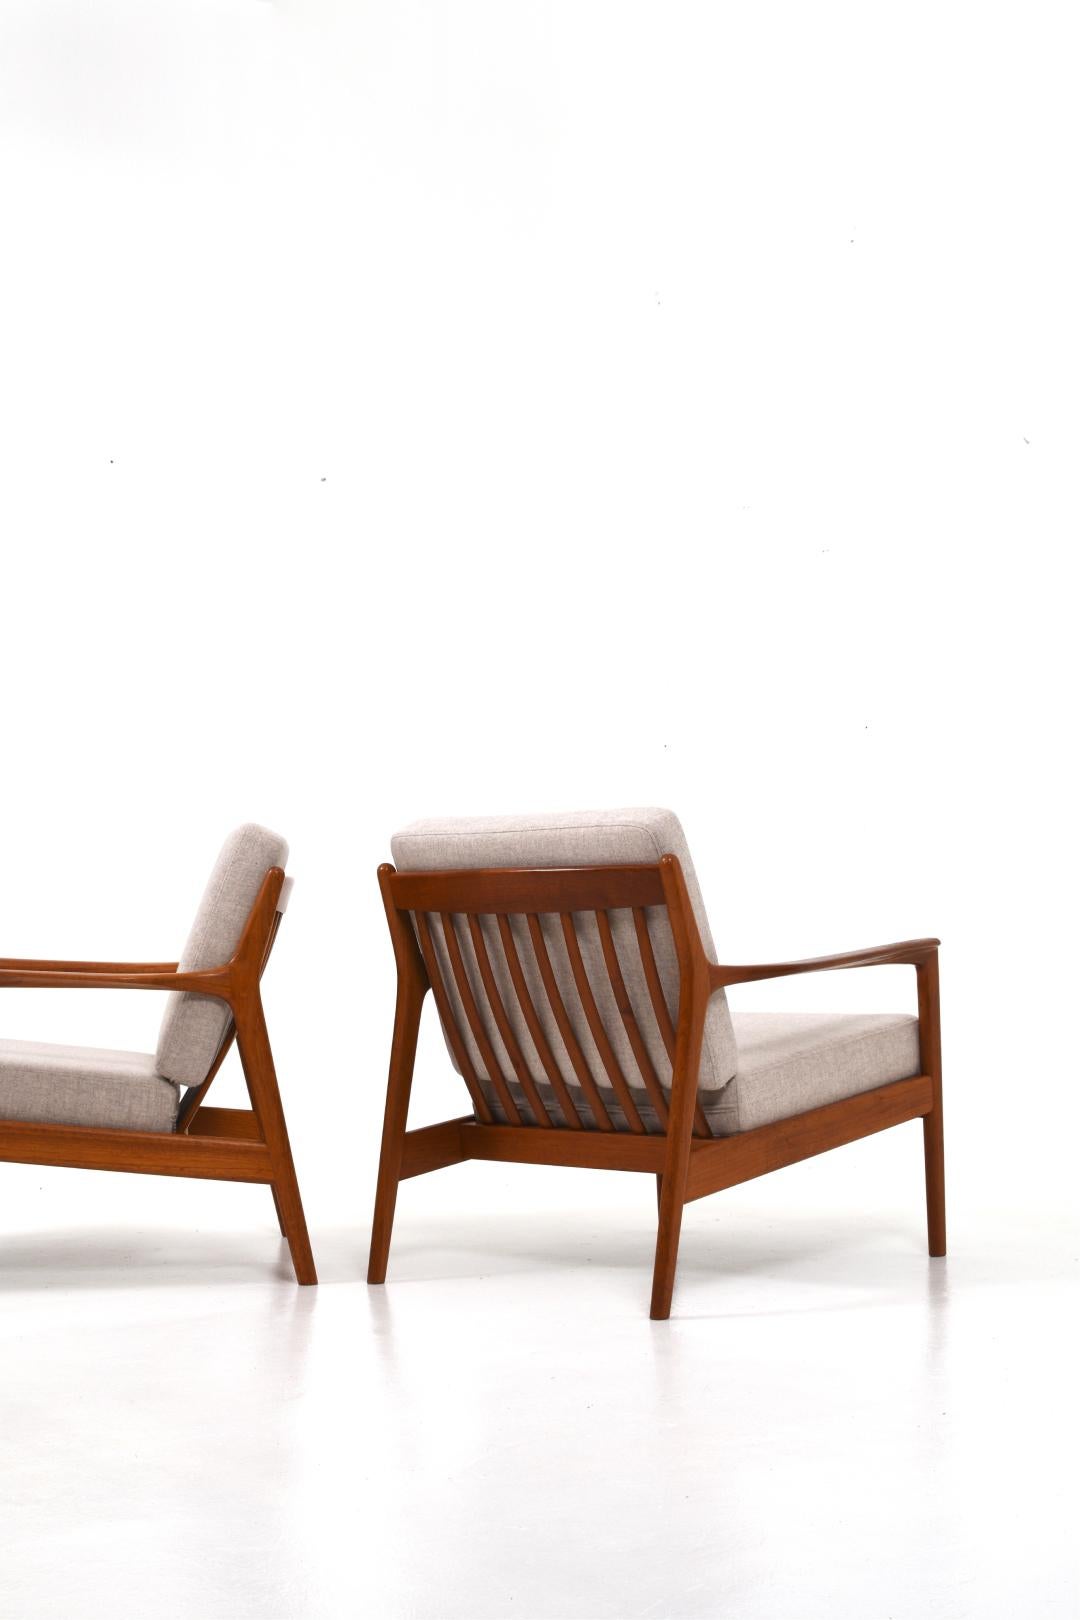 Mid-20th Century Teak Lounge Chairs USA 75 Folke Ohlsson by DUX For Sale